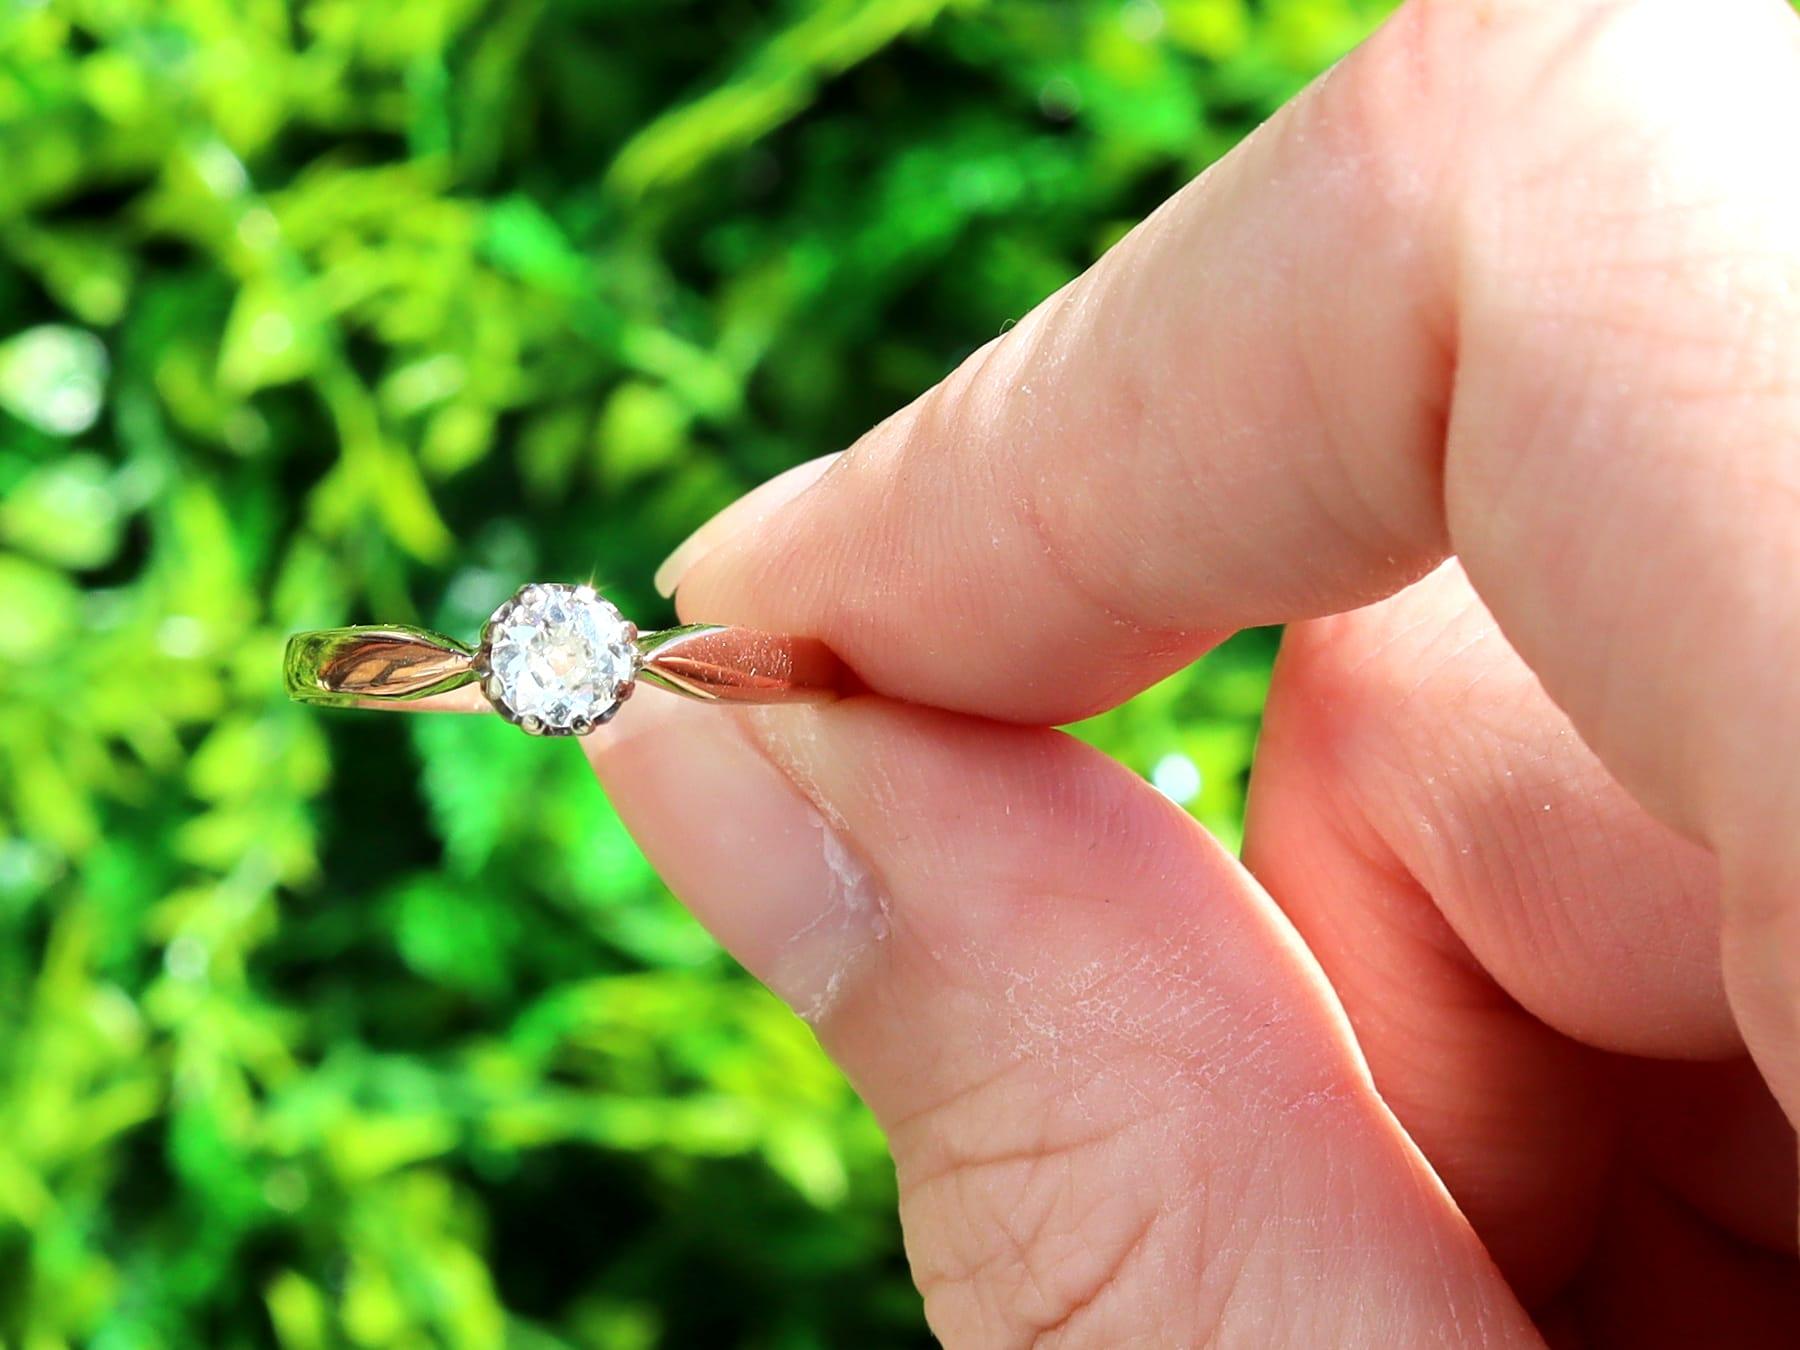 A fine and impressive antique 0.32 carat diamond and 14 karat rose gold, white gold set solitaire ring; part of our diamond jewelry/estate jewelry collections.

This impressive antique diamond solitaire ring has been crafted in 14k rose gold with a